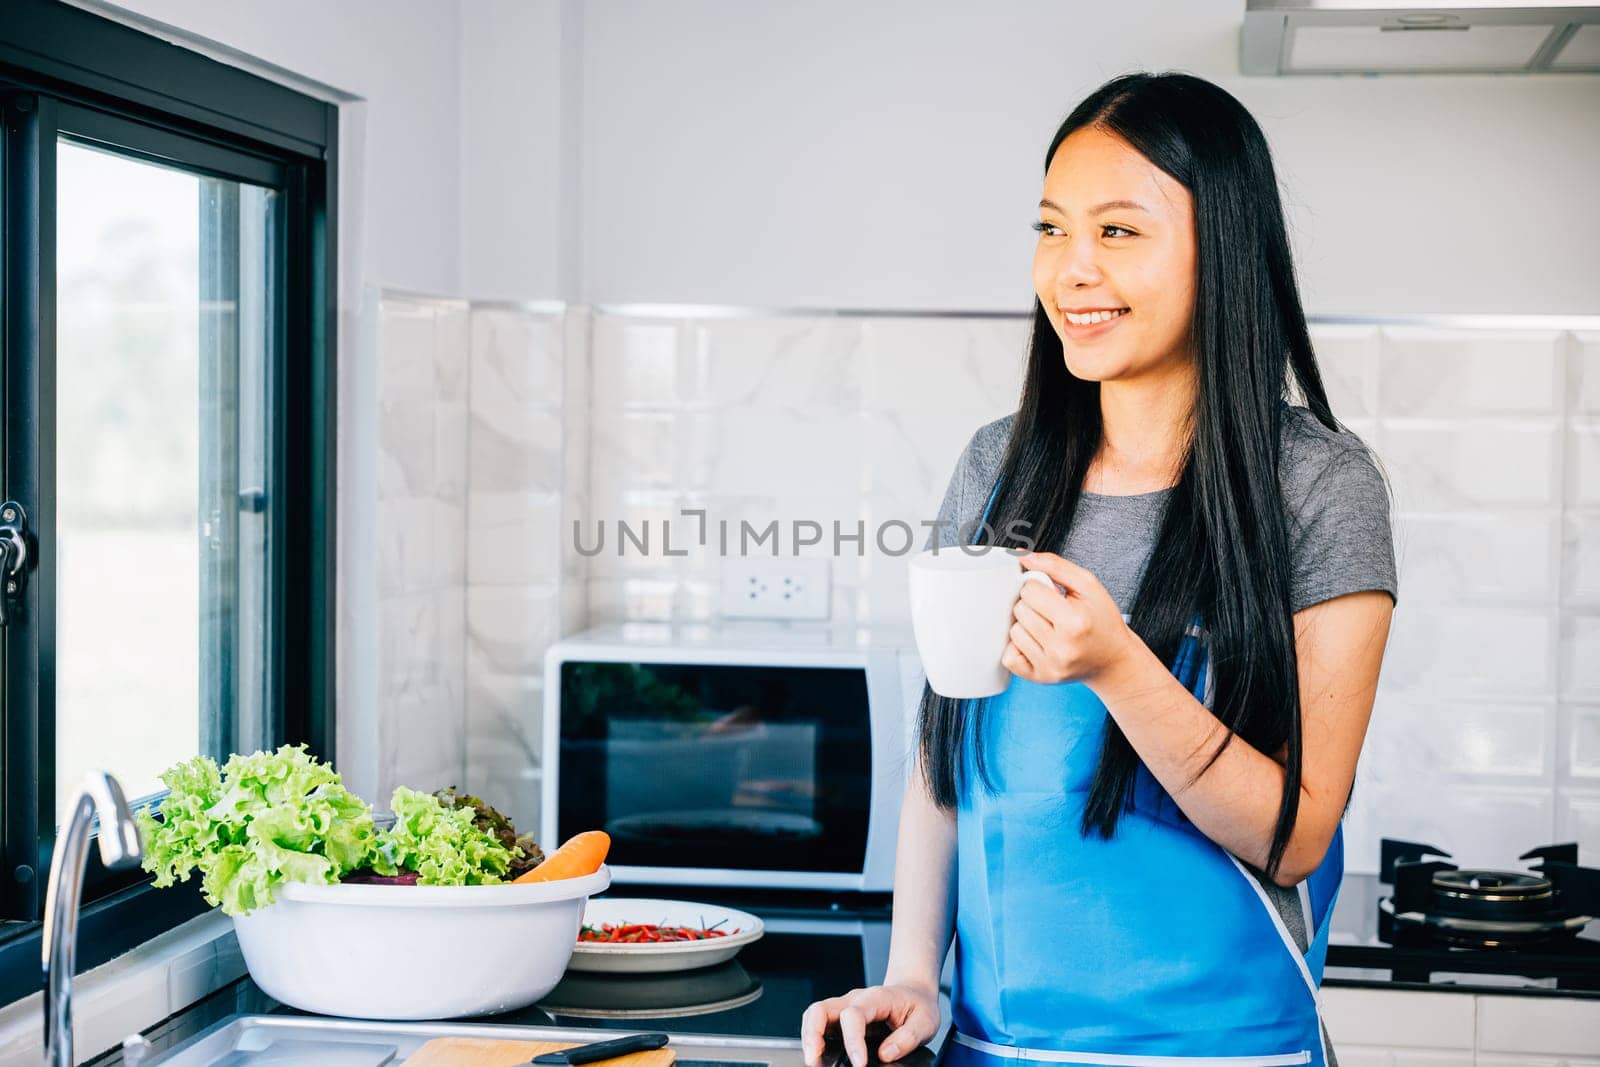 A woman enjoys her morning in a cozy kitchen holding a cup of coffee and smiling. Illustrating a carefree cheerful moment while savoring a hot drink at home.